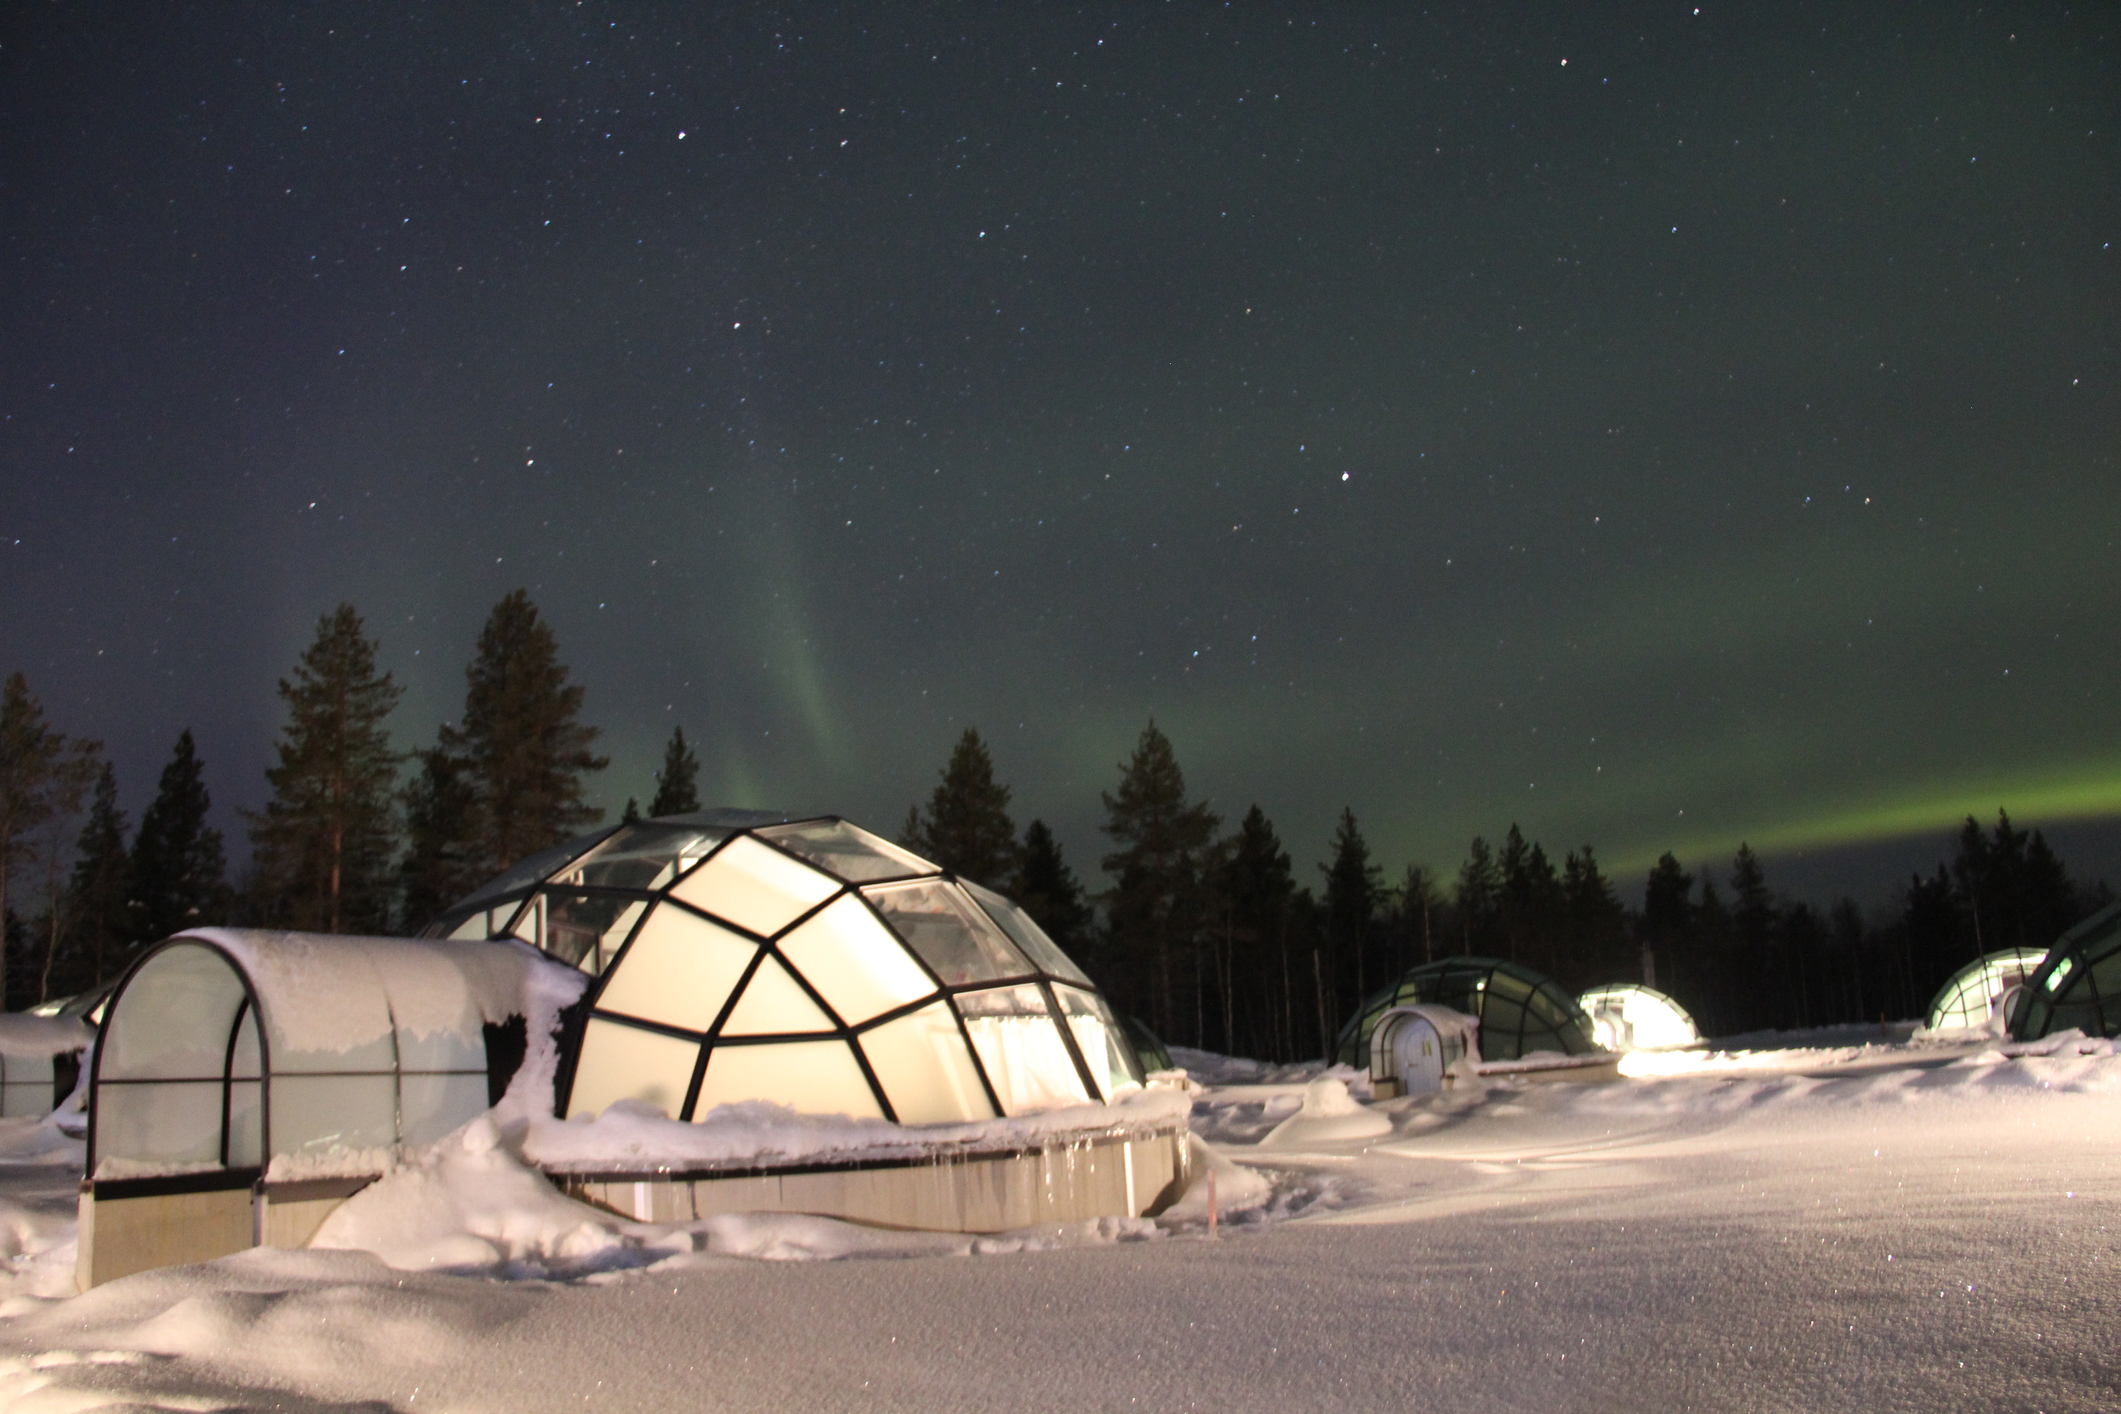 Northern Lights over Glass Igloos in Finland